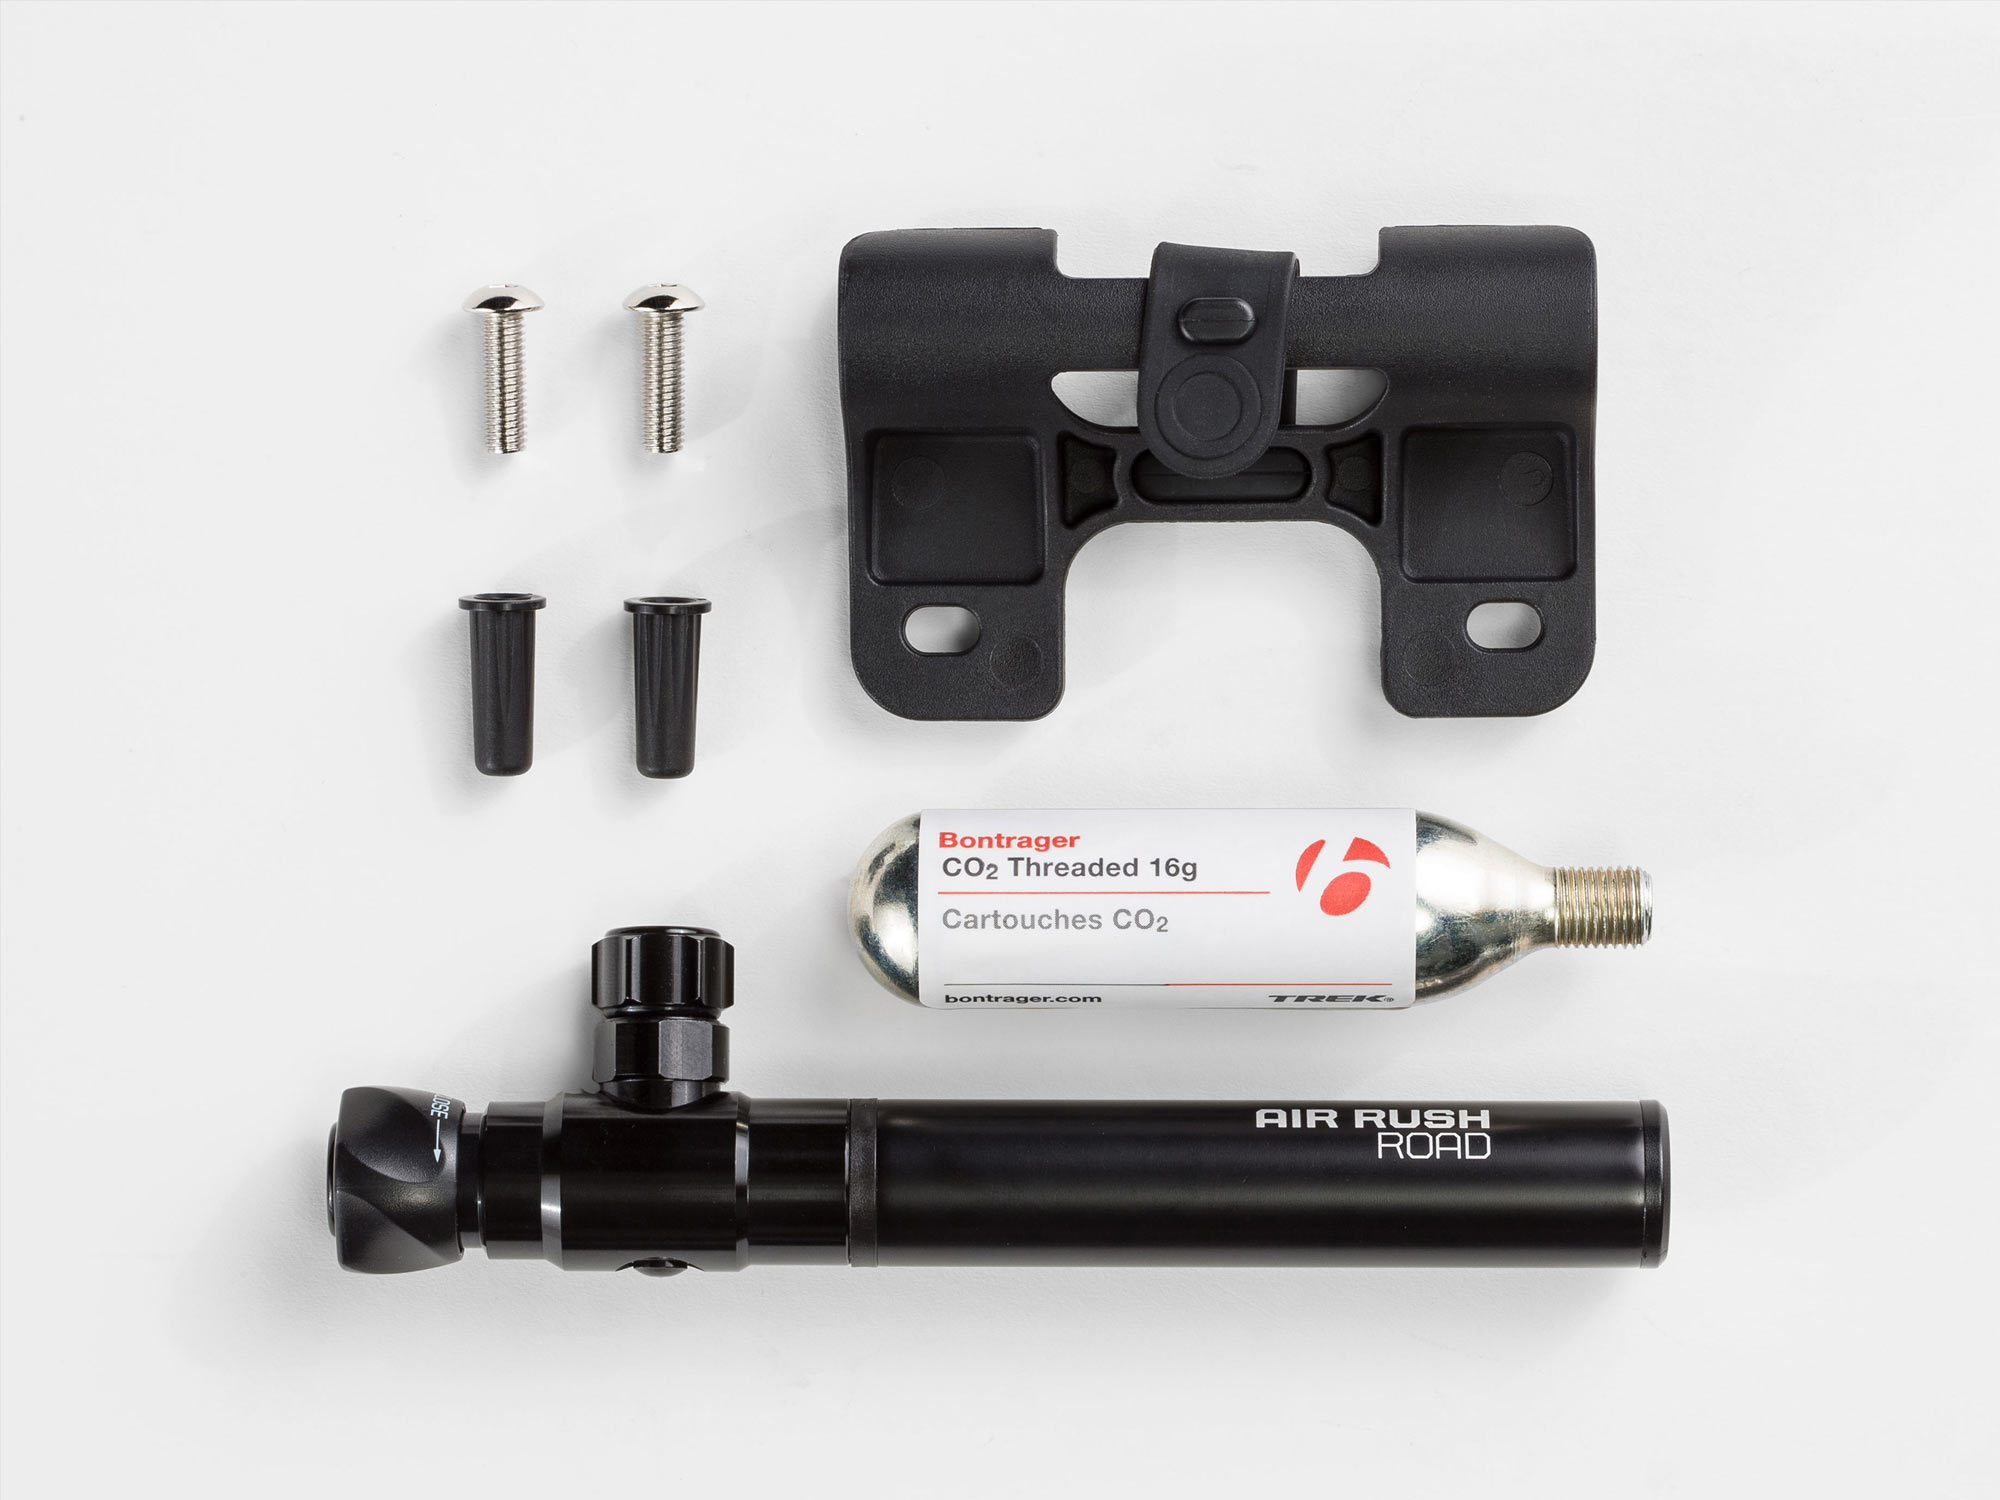 Mini pump and CO₂ canister plus mount